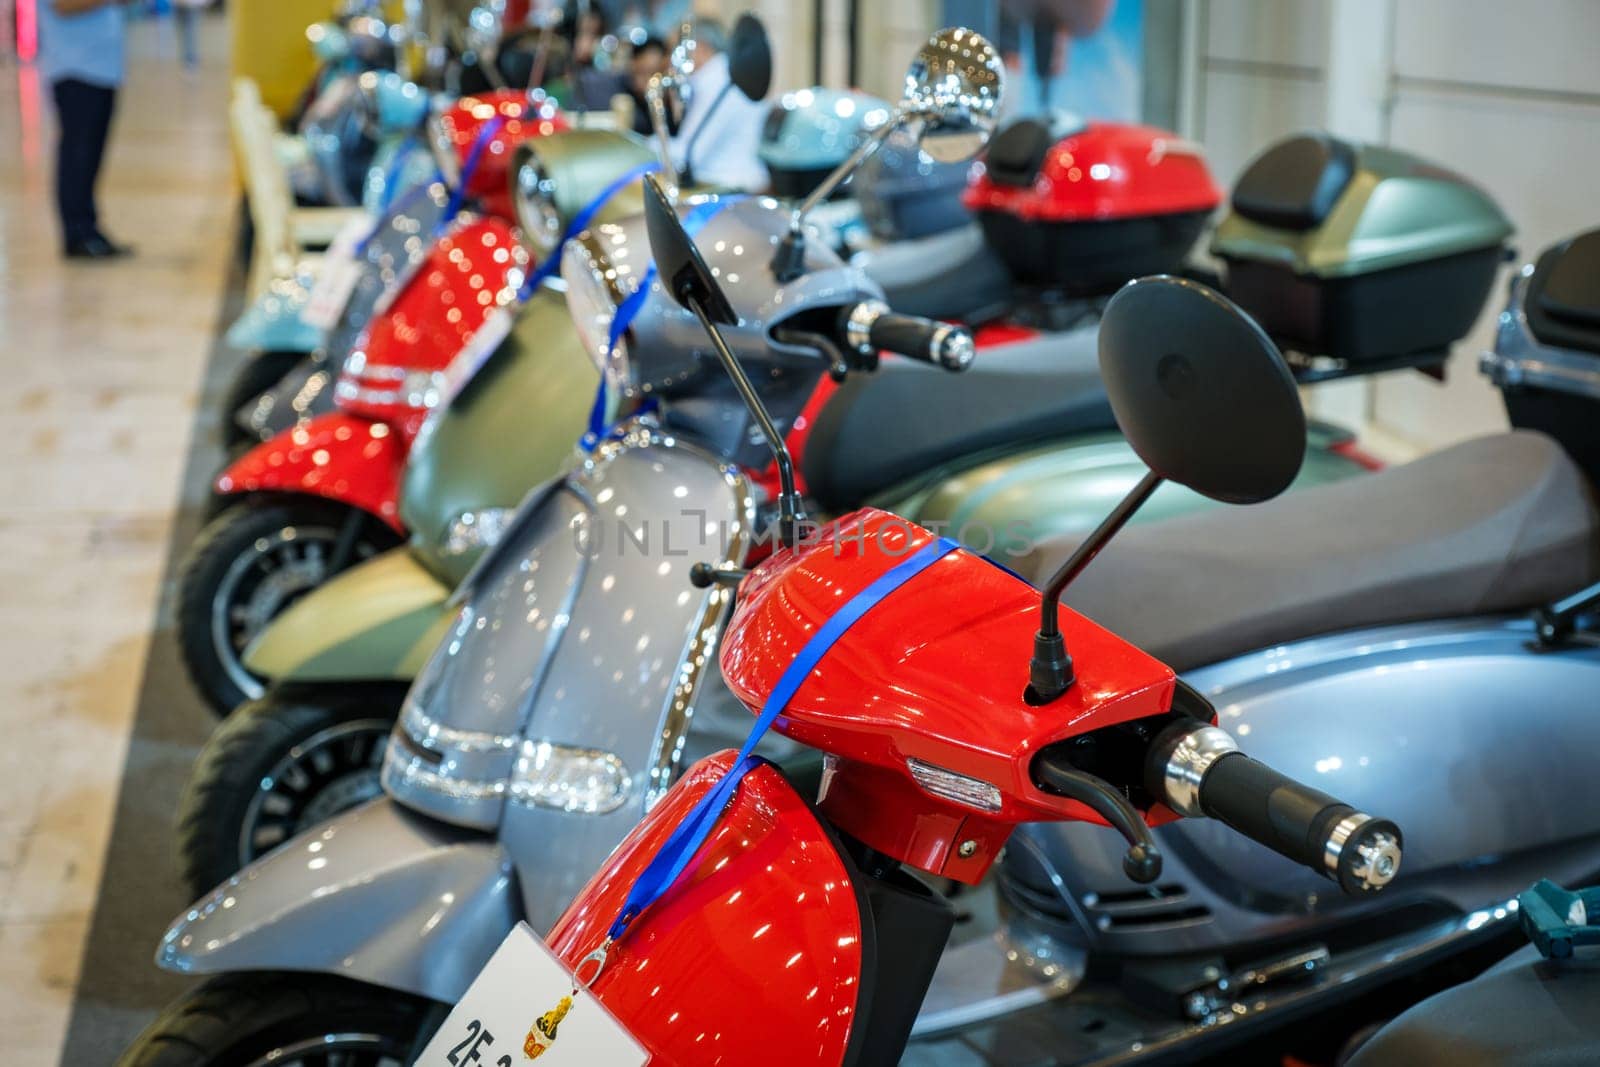 Jiangsu Goldenlion electric scooters at ECAR SHOW - Hybrid and Electric Motor Show by dimol